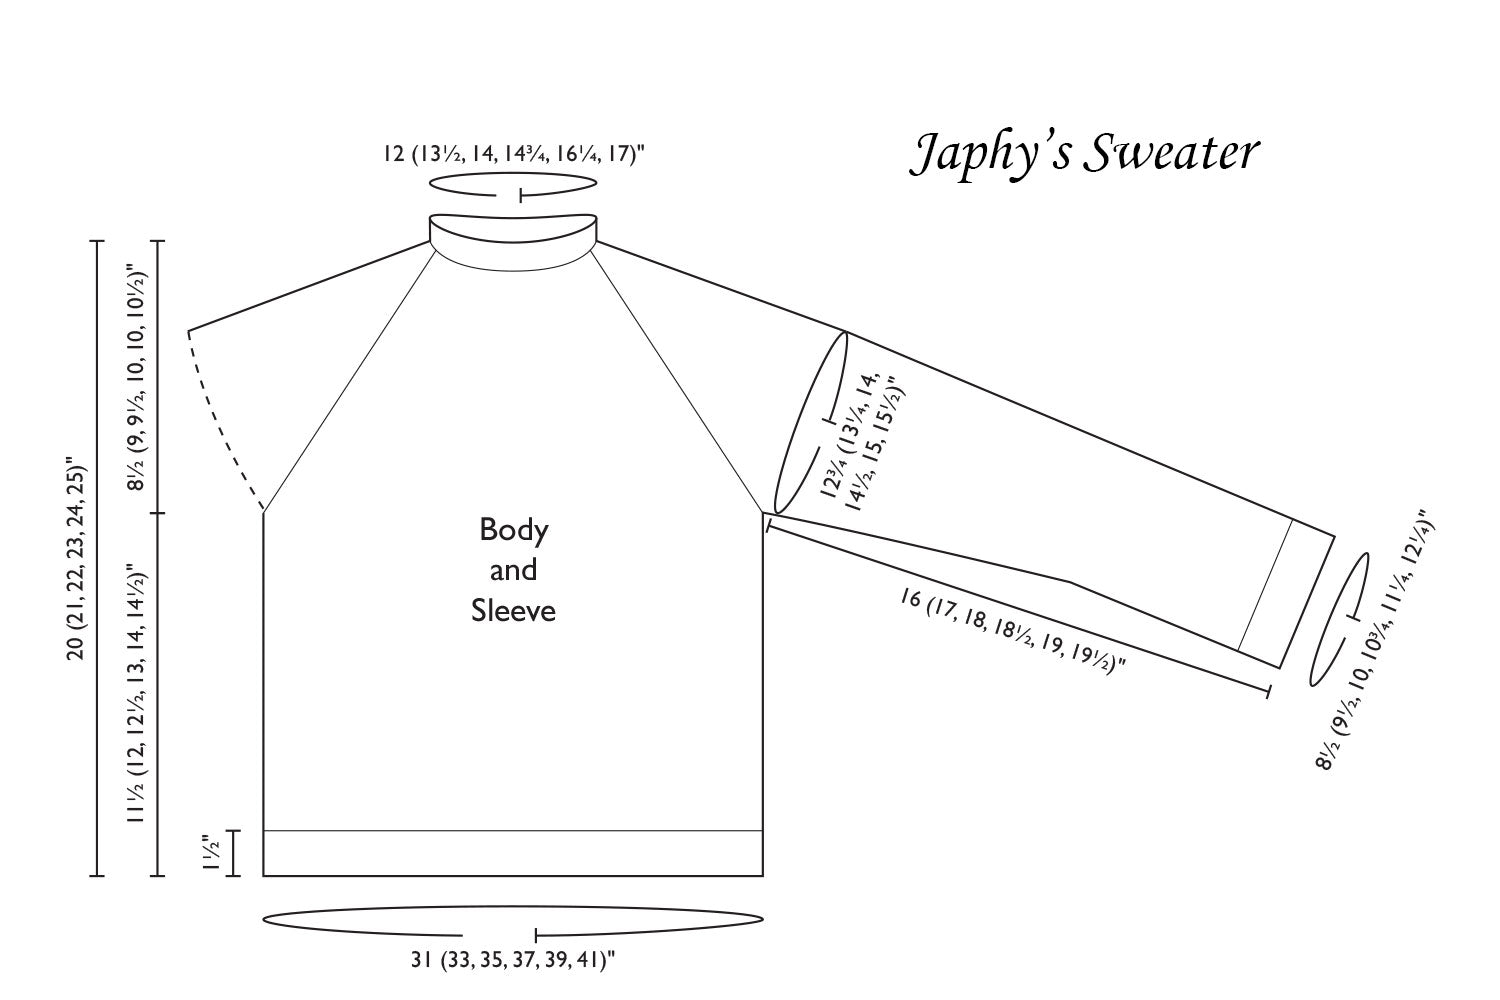 Detailed schematic line drawing with dimensions for Japhy's Sweater pattern